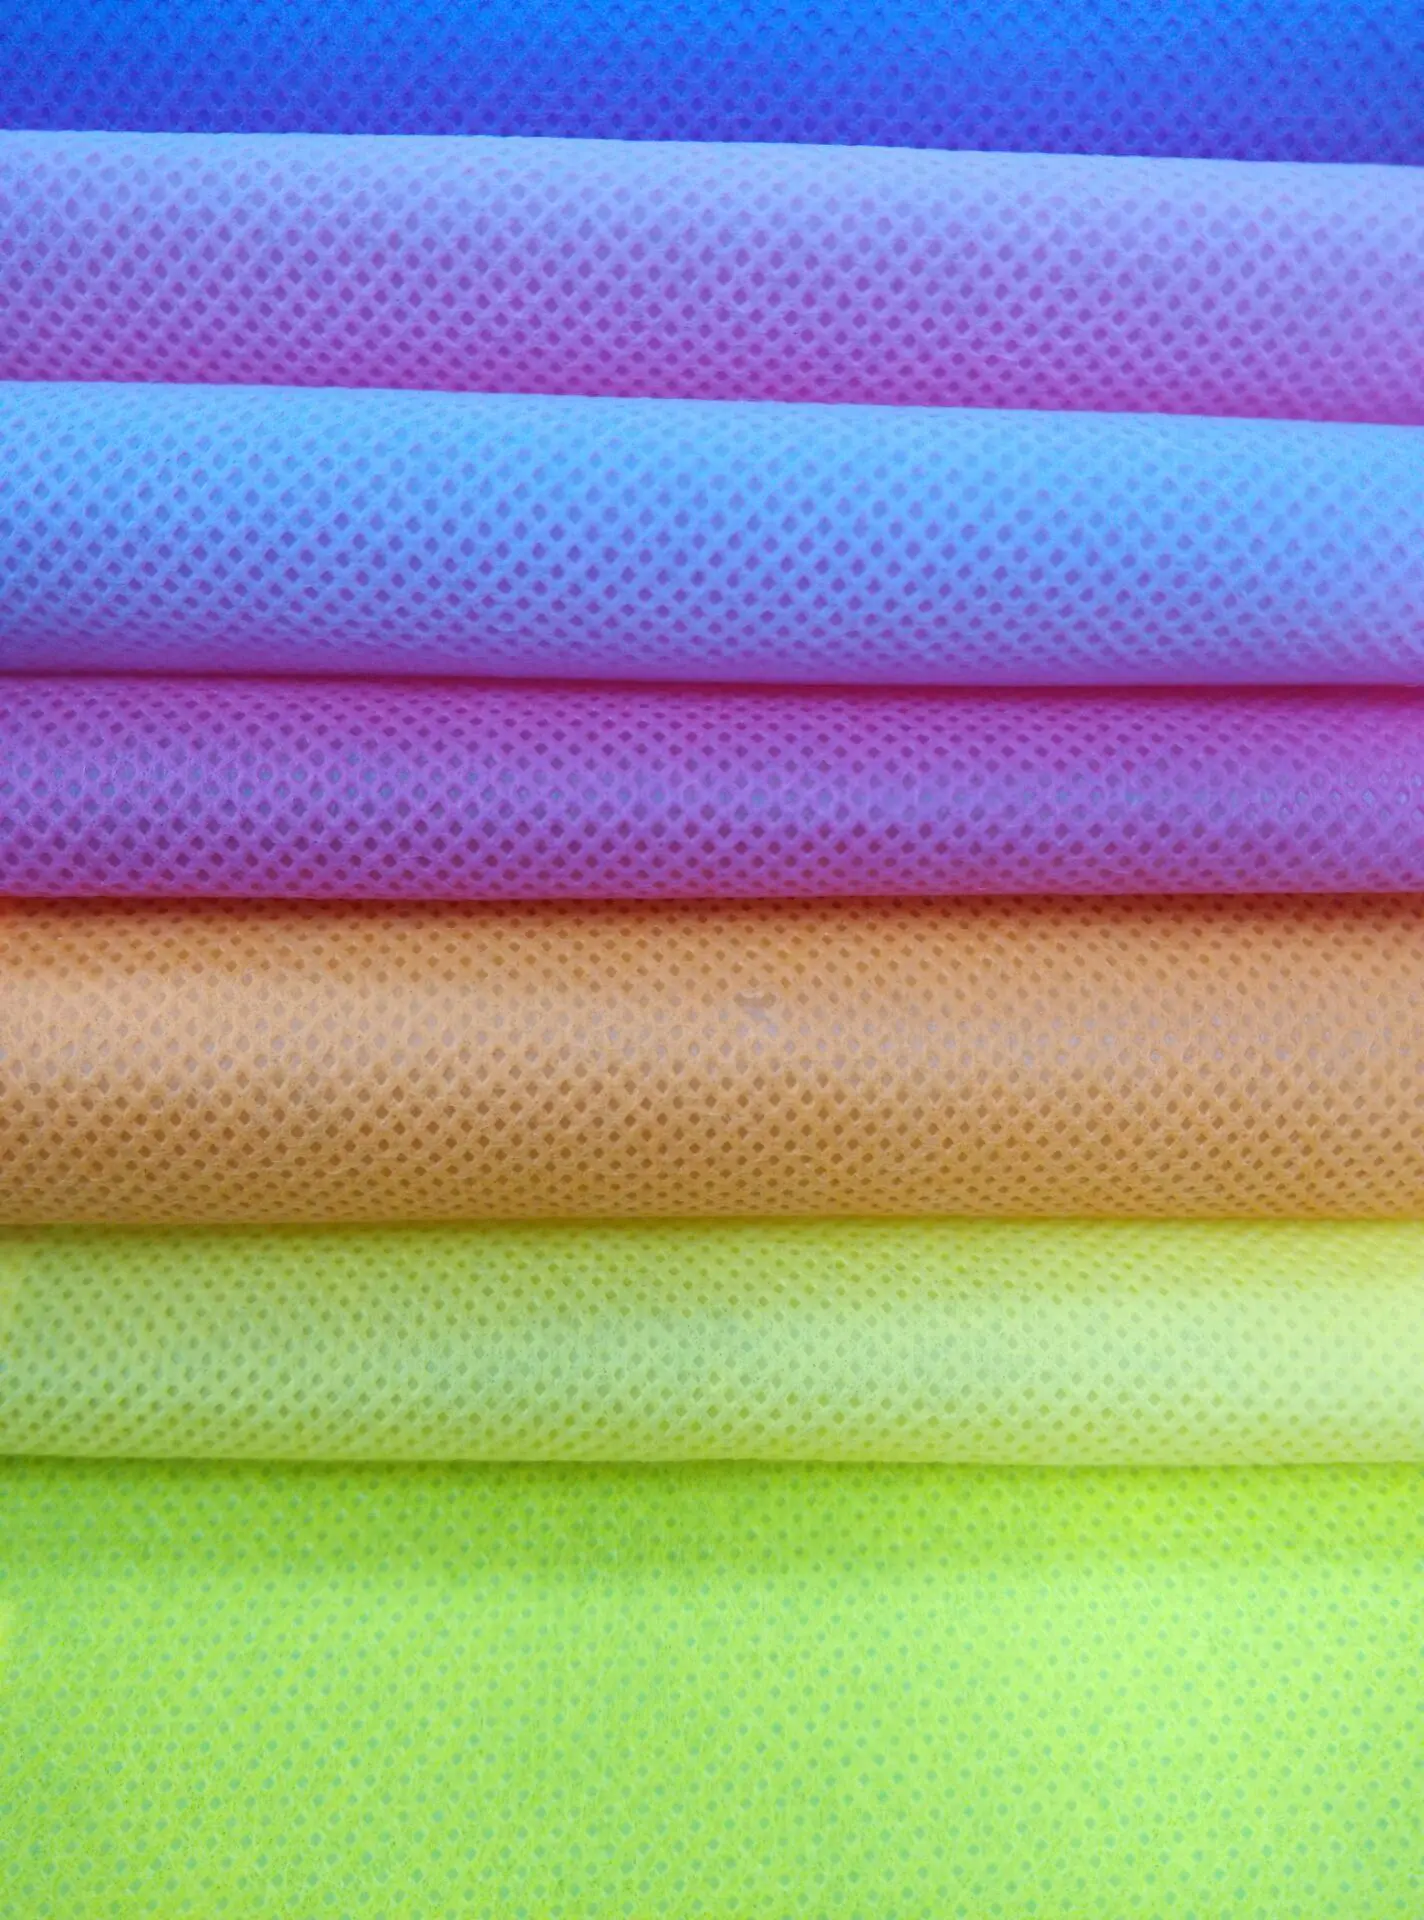 PP Non-Woven Fabric Made in China Fabric